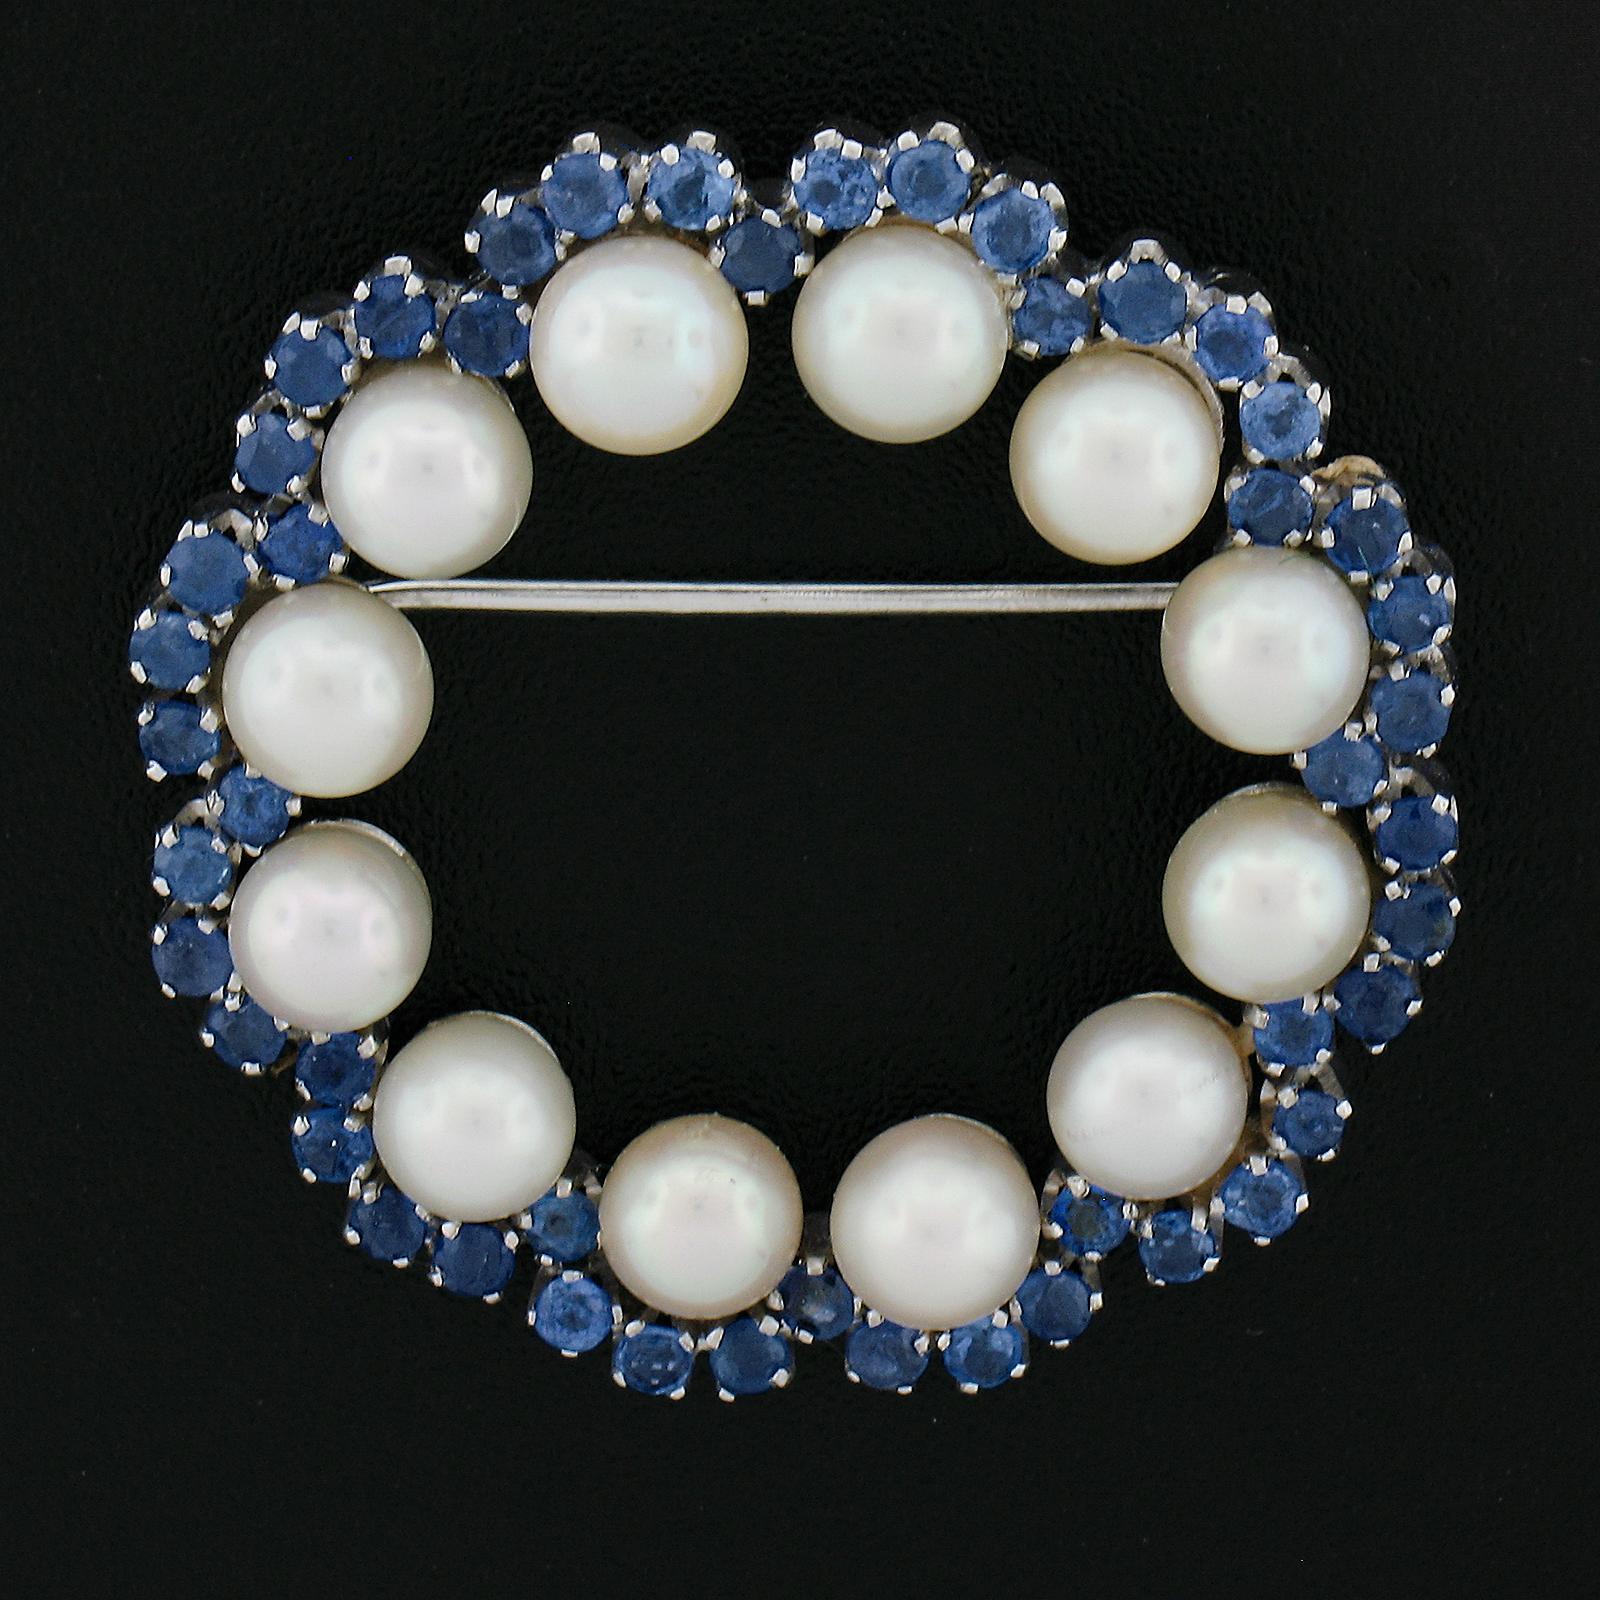 --Stone(s):--
(50) Natural Genuine Sapphires - Old Round Cut - Prong Set - Cornflower Velvety Blue Color - 1.50ctw (approx.)
(9) Genuine Cultured Akoya Pearls - Round Shape - Stem Set - White w/ Pink Overtone Color - Excellent Luster - 5mm each